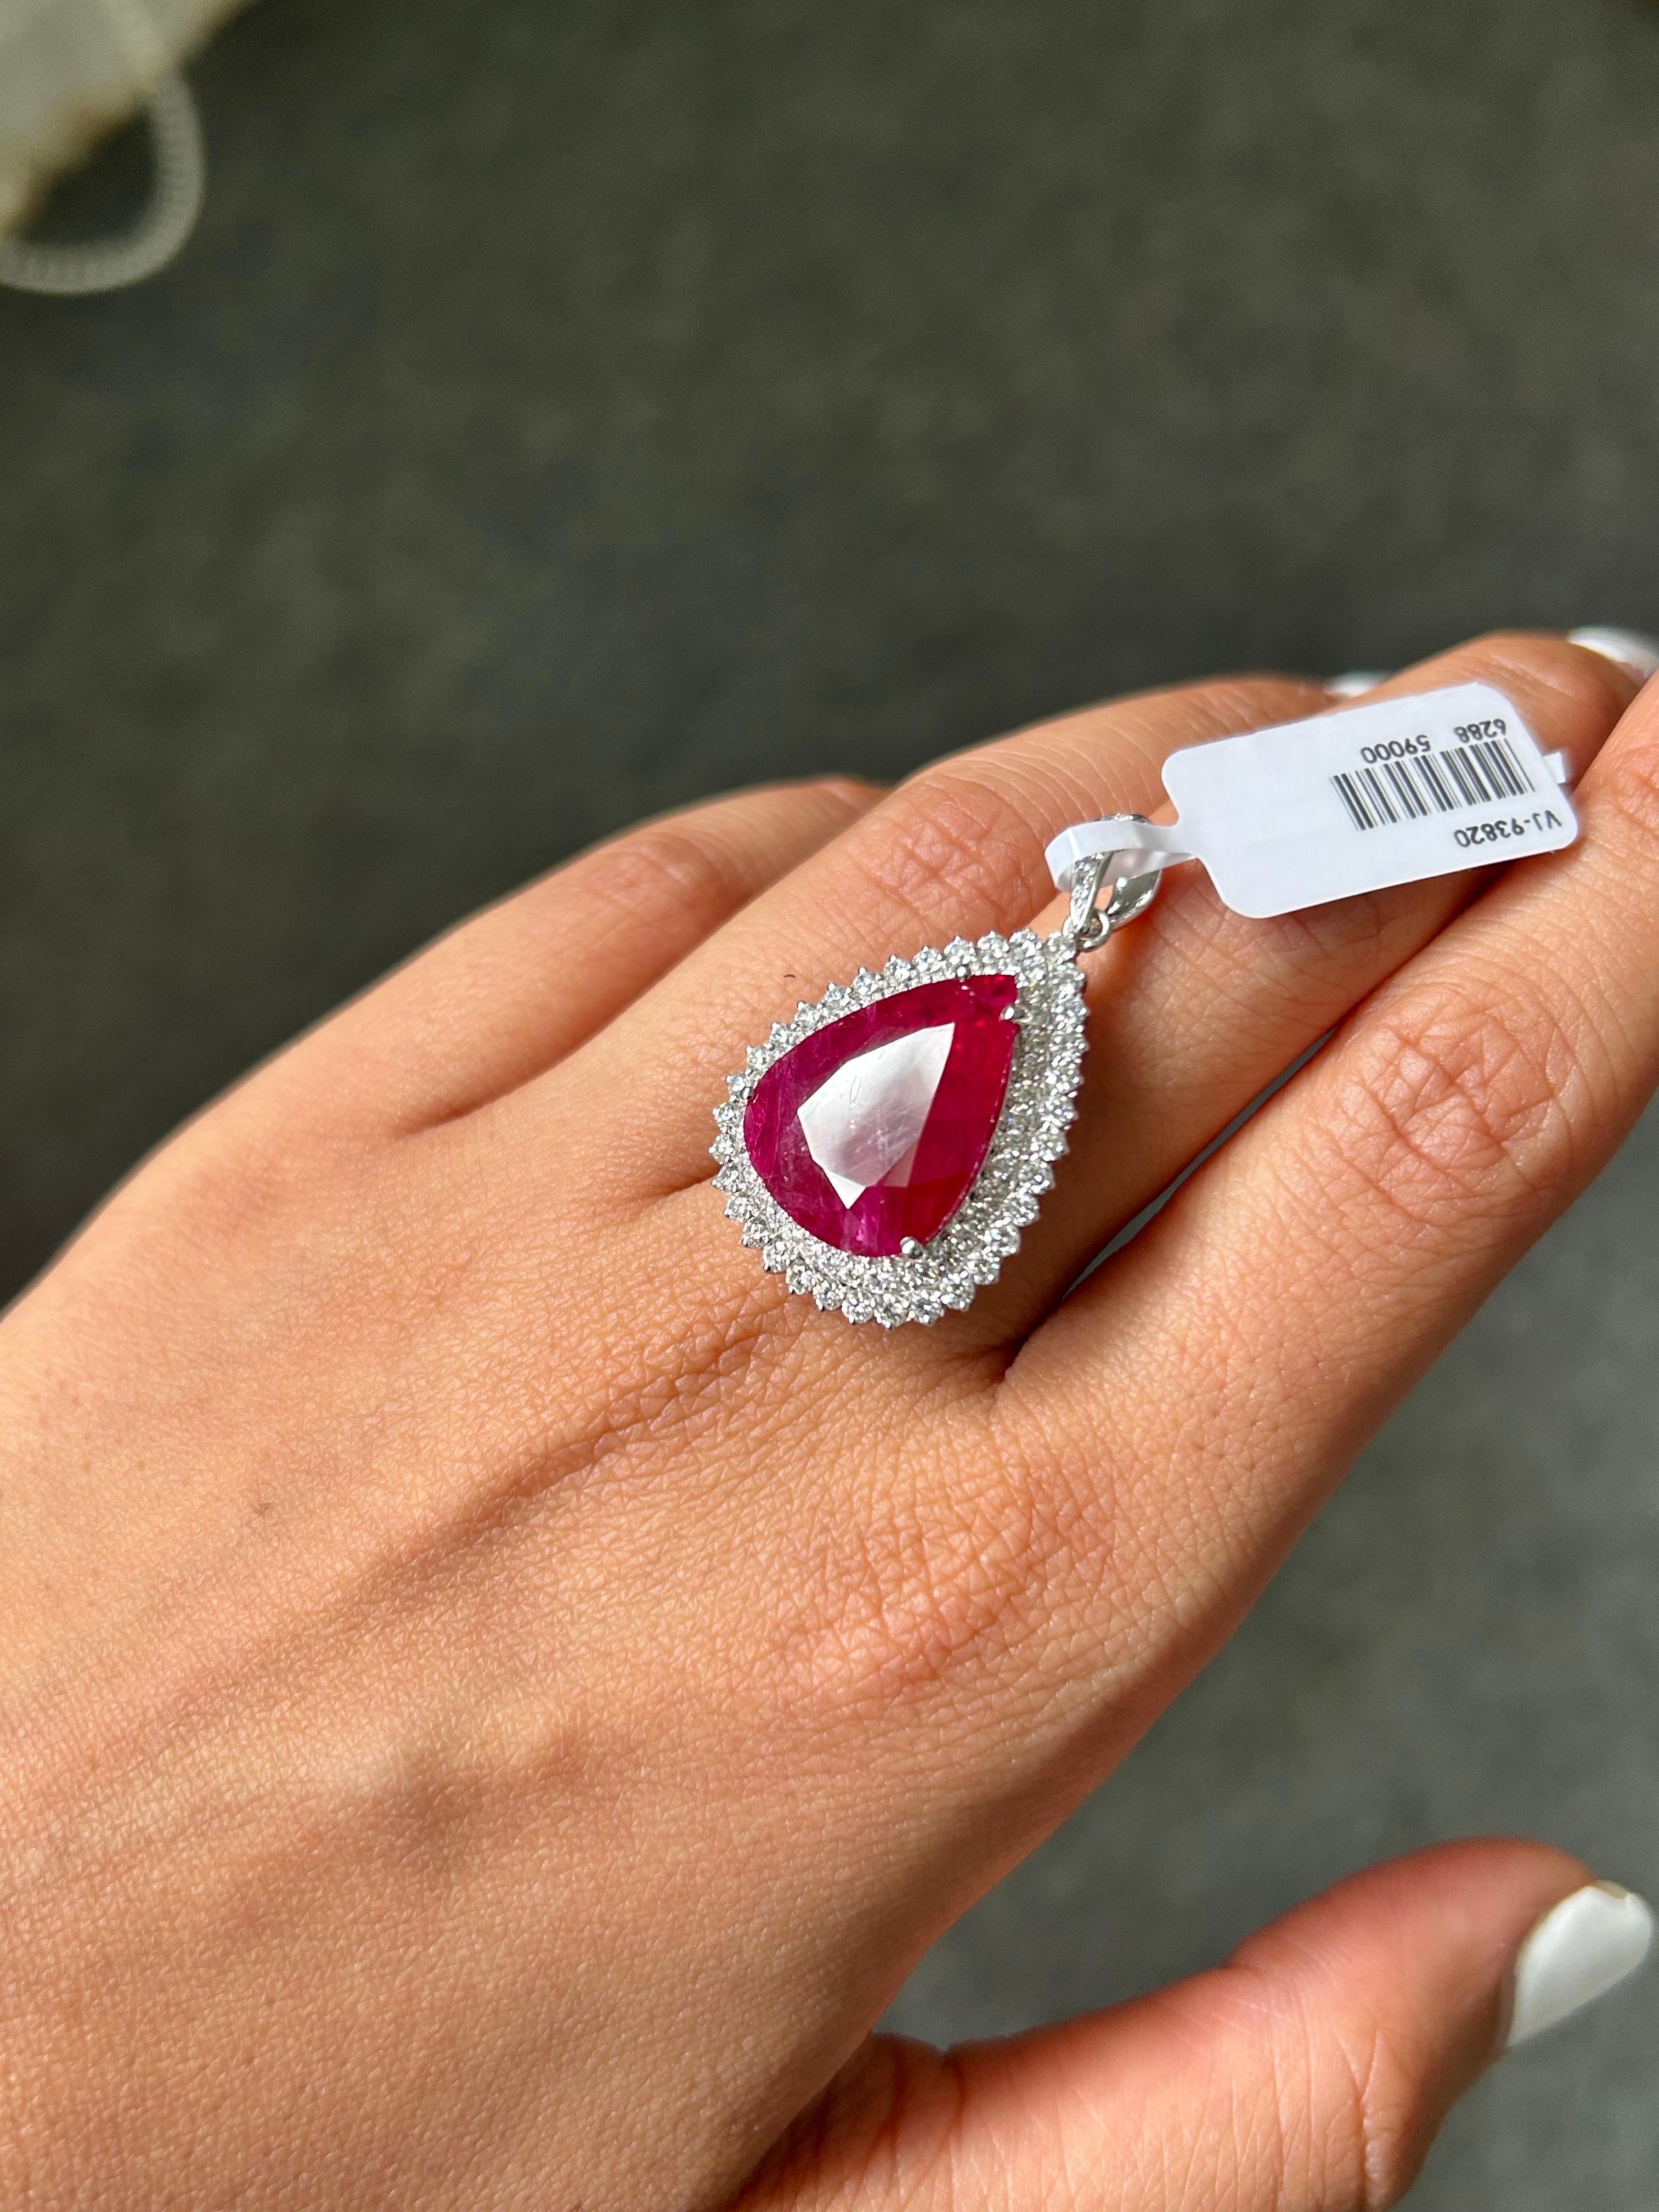 Make a statement by wearing this stunning pear shape, 10.98 carat natural Mozambique Ruby pendant, surrounded by 1.45 carat White Diamonds, set in solid 18K White Gold. The pendant comes without a chain, but can be added. We can convert this pendant